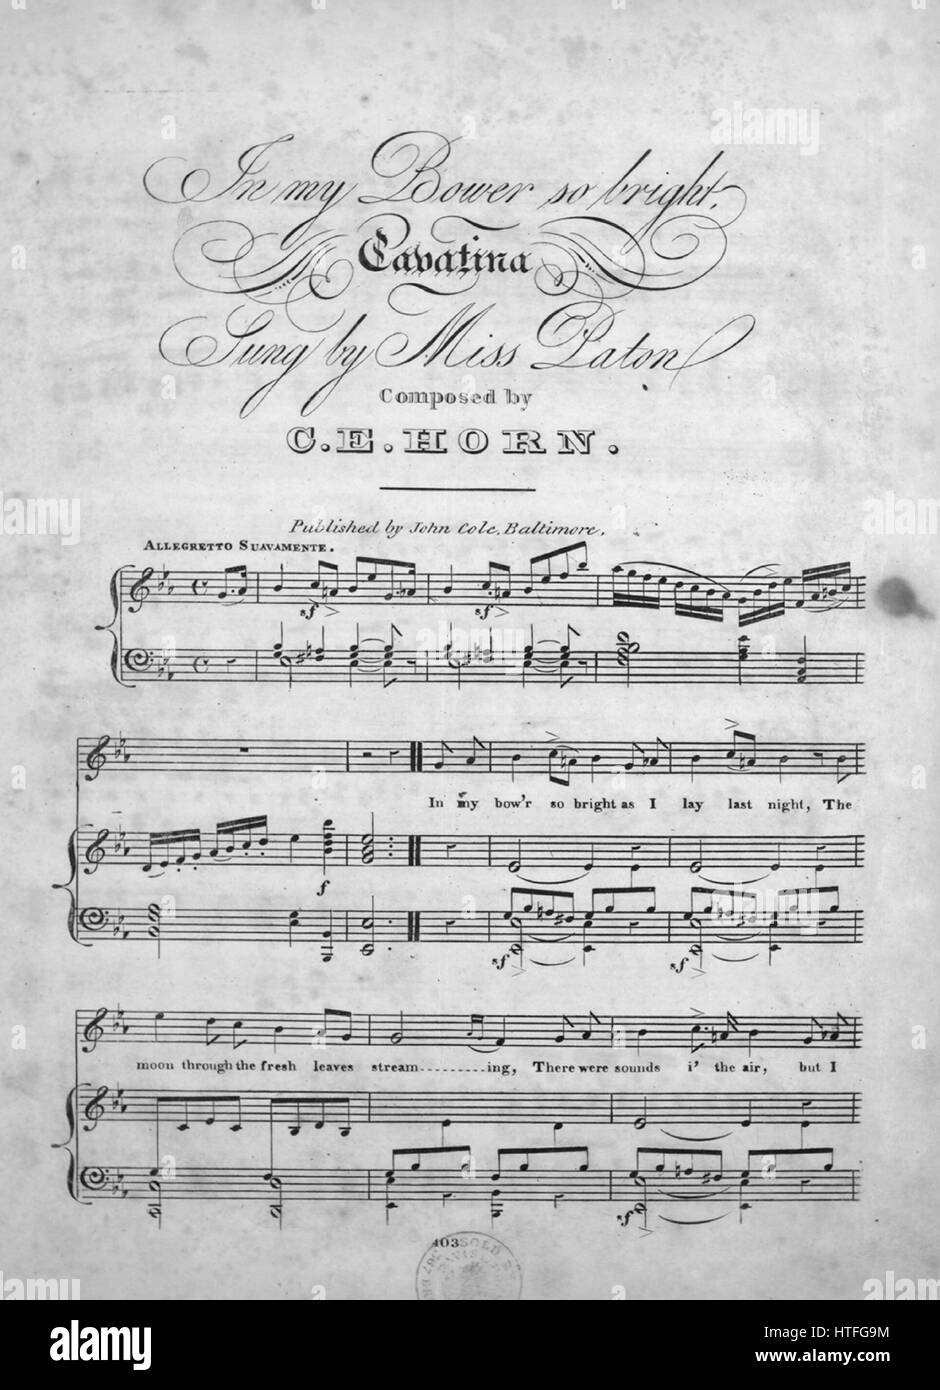 Sheet music cover image of the song 'In My Bower So Bright Cavatina', with original authorship notes reading 'Composed by CE Horn', United States, 1900. The publisher is listed as 'John Cole', the form of composition is 'through-composed', the instrumentation is 'piano and voice', the first line reads 'In my bow'r so bright as I lay last night, The moon through the fresh leaves streaming', and the illustration artist is listed as 'None'. Stock Photo